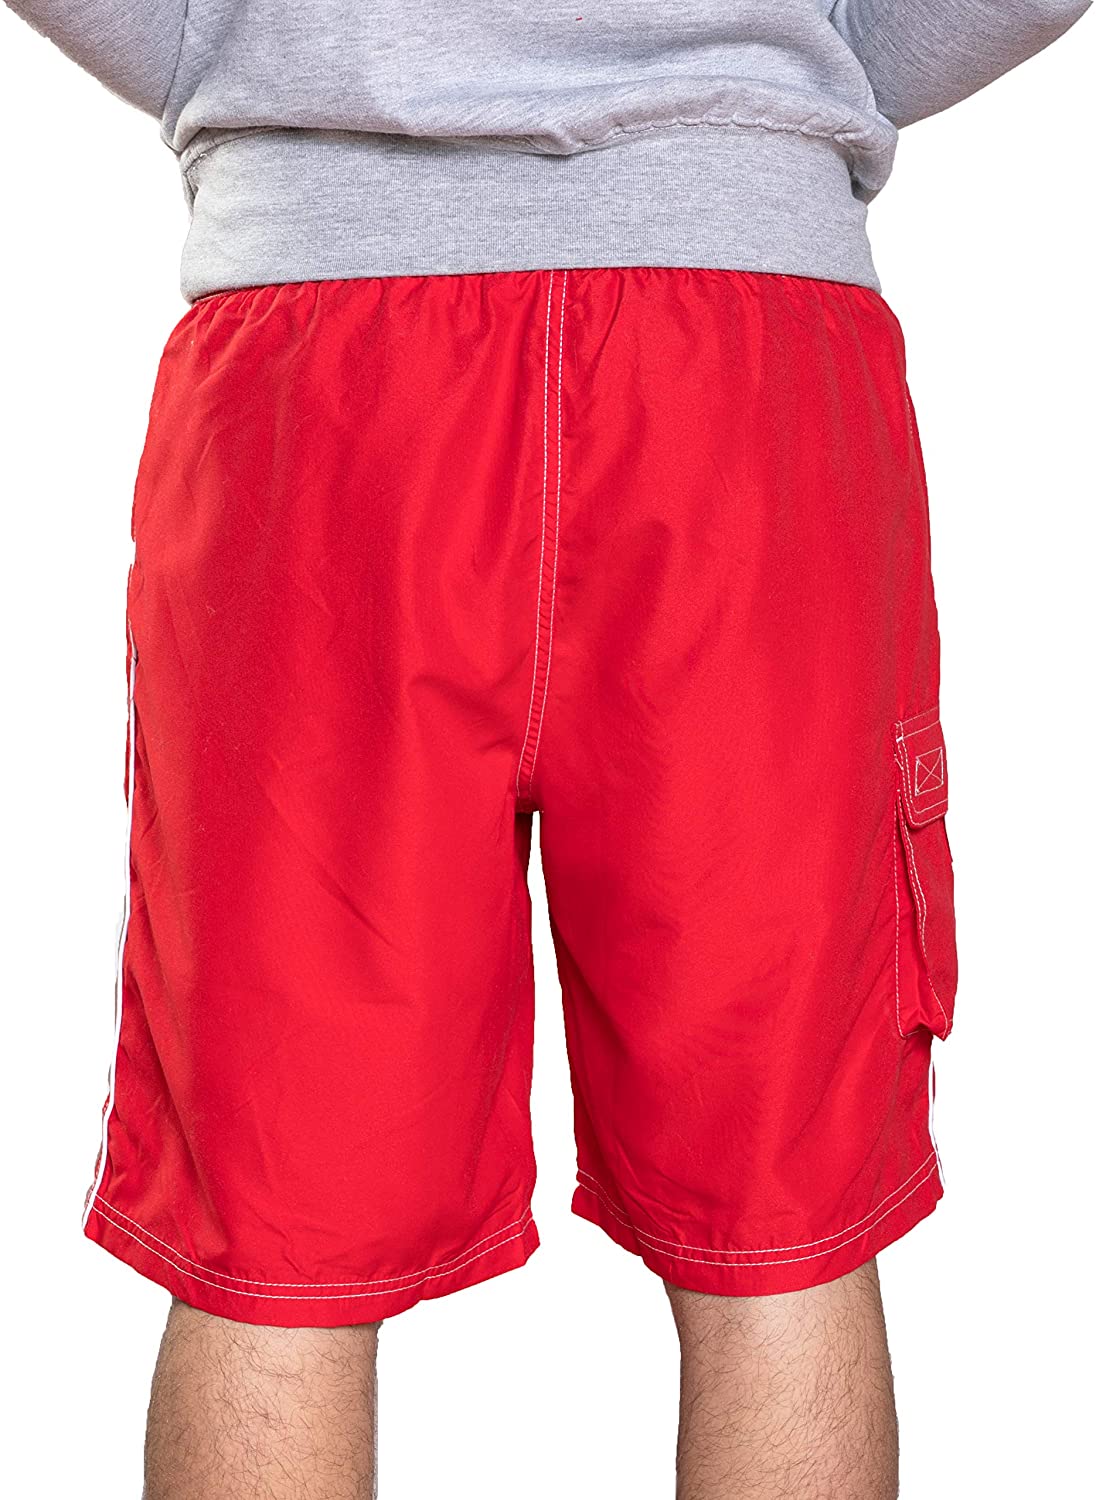 LIFEGUARD Officially Licensed Red Men's Board Shorts Swim, Red, Size X ...